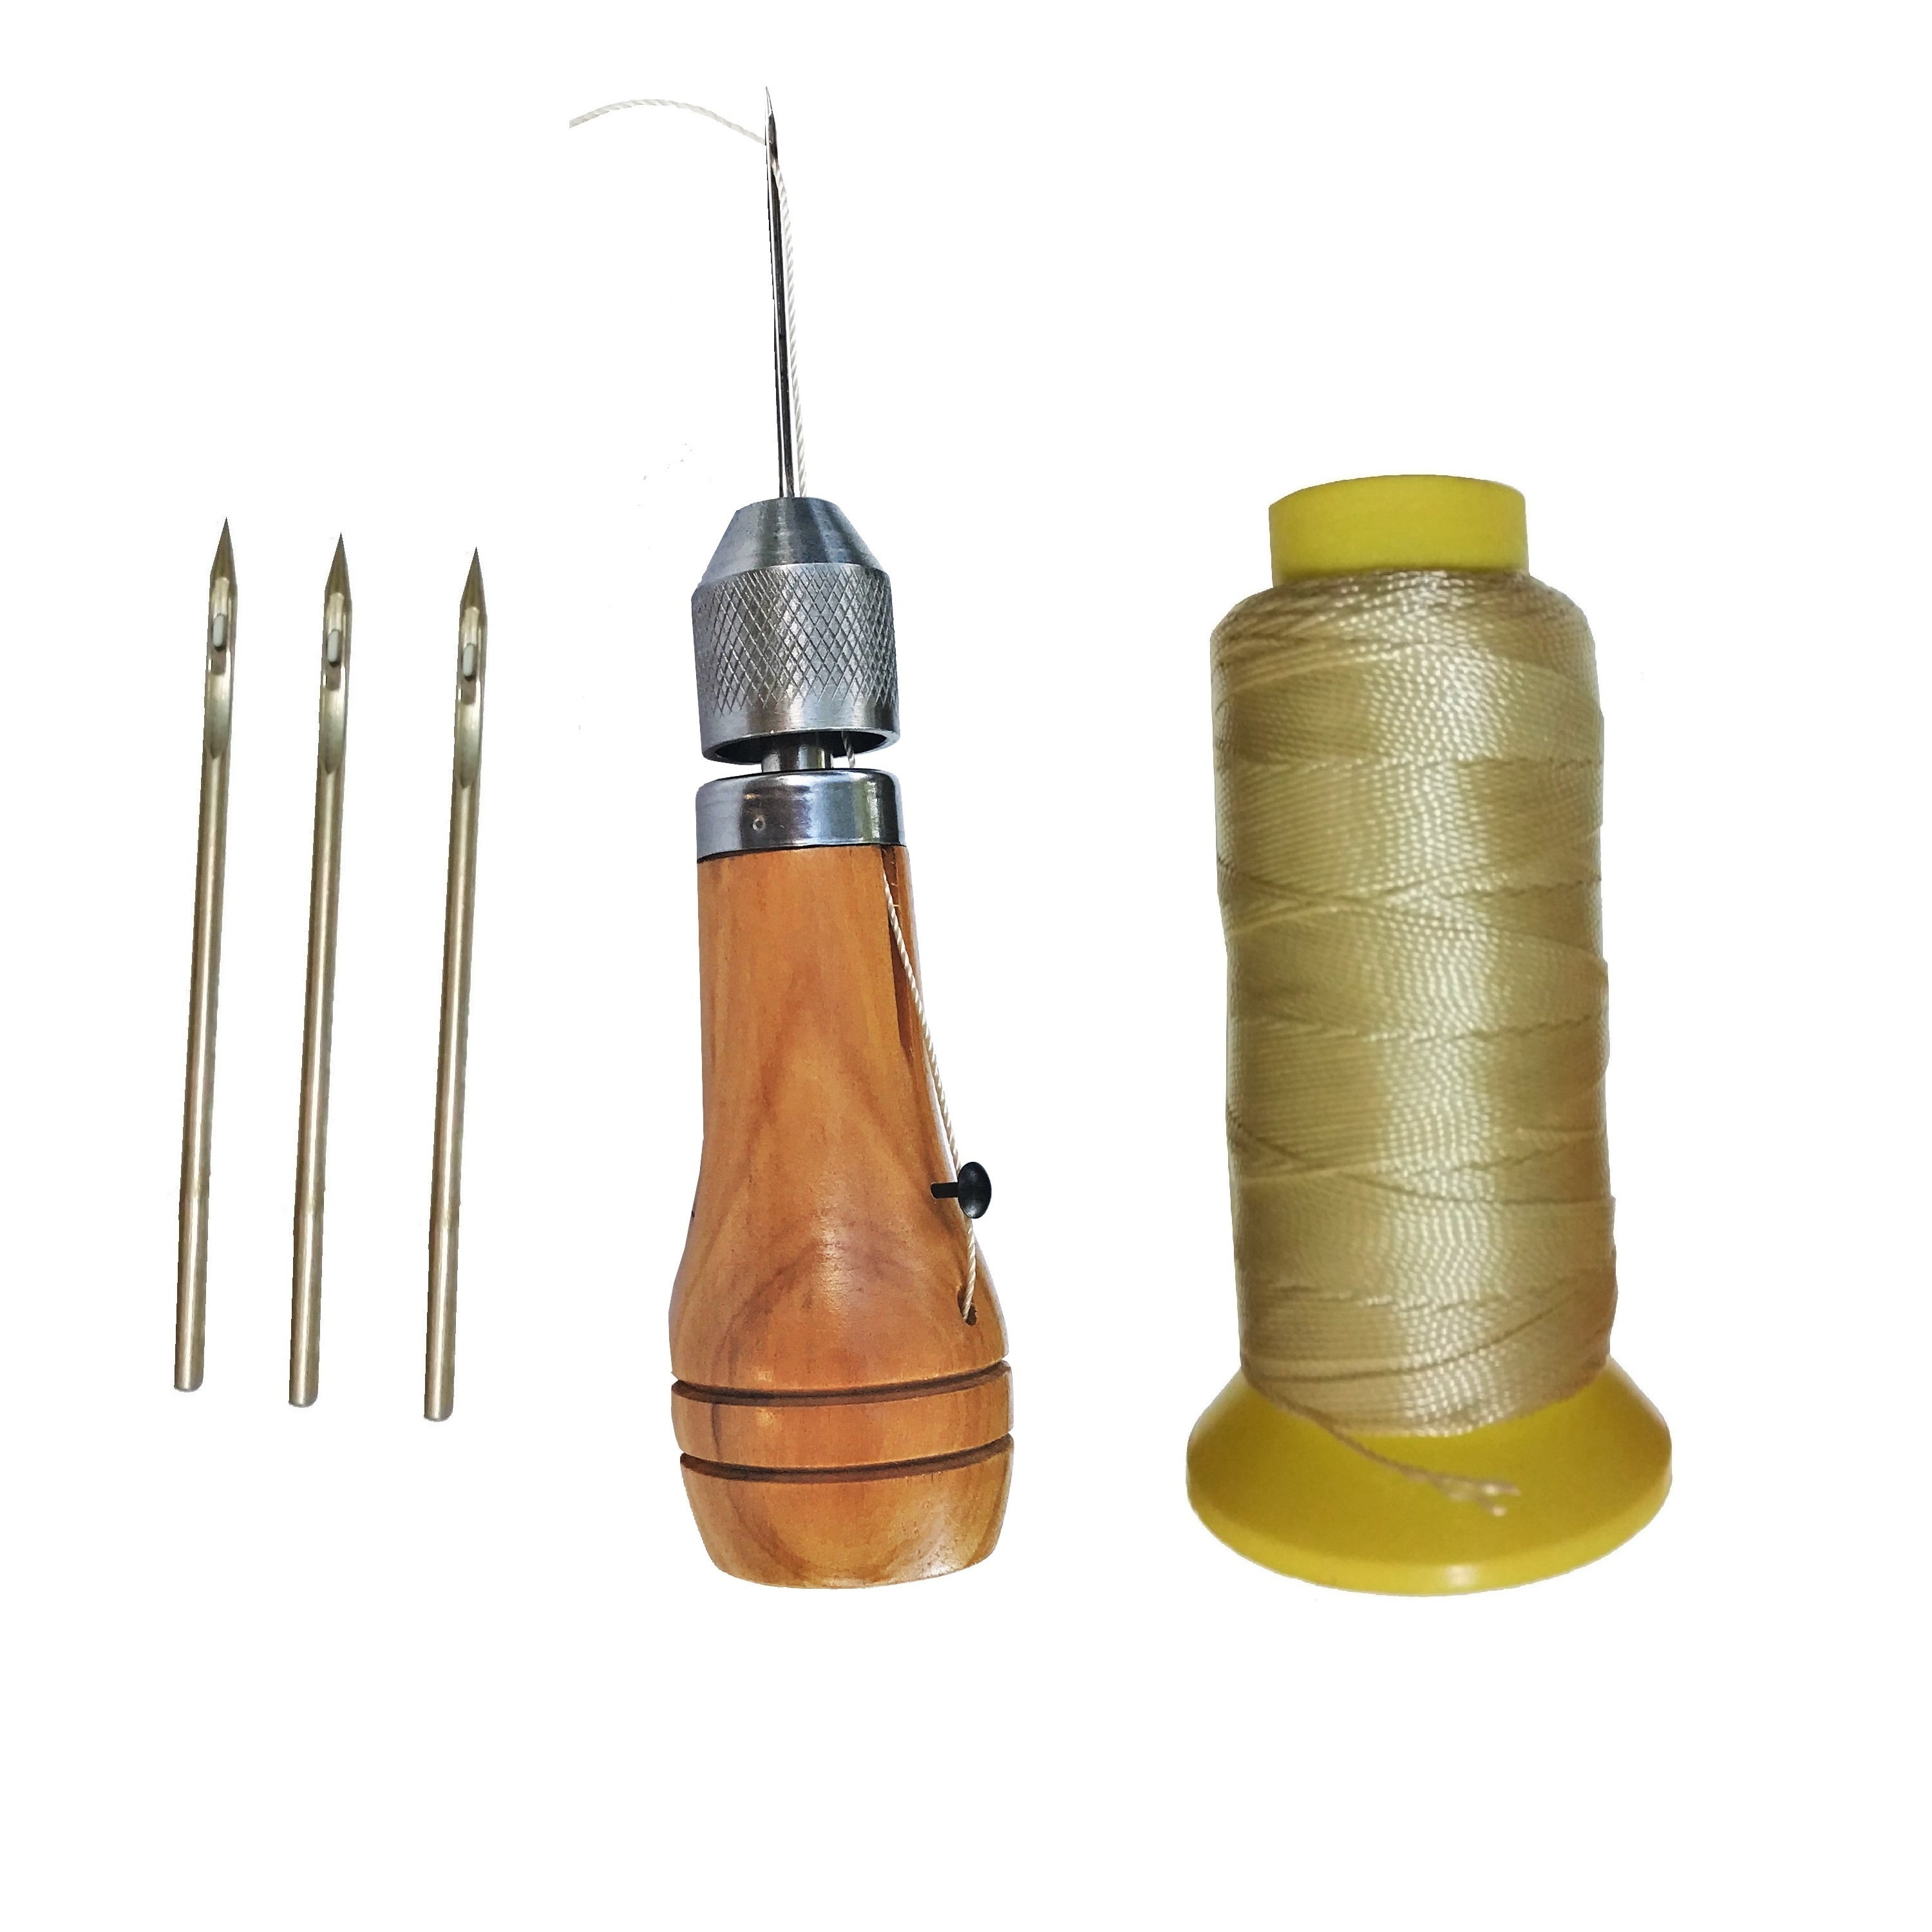 Becho Professional Stitcher Sewing Awl Leather Craft Making,Stitcher Repair Accessory Tool Kit for Leather Sail,Heavy Canvas and More